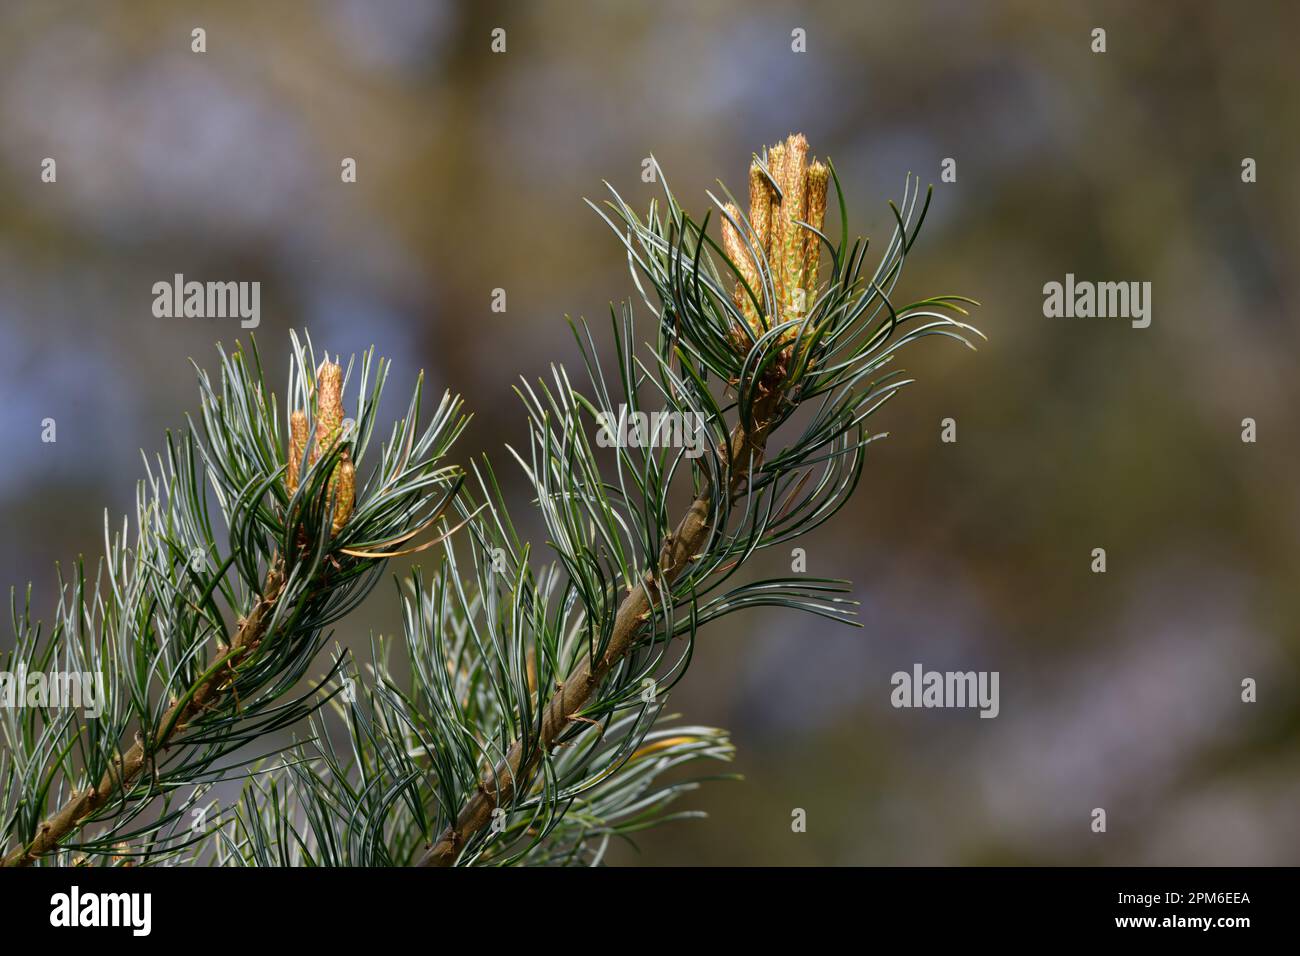 Pinus parviflora young pine cones on a branch in spring Stock Photo